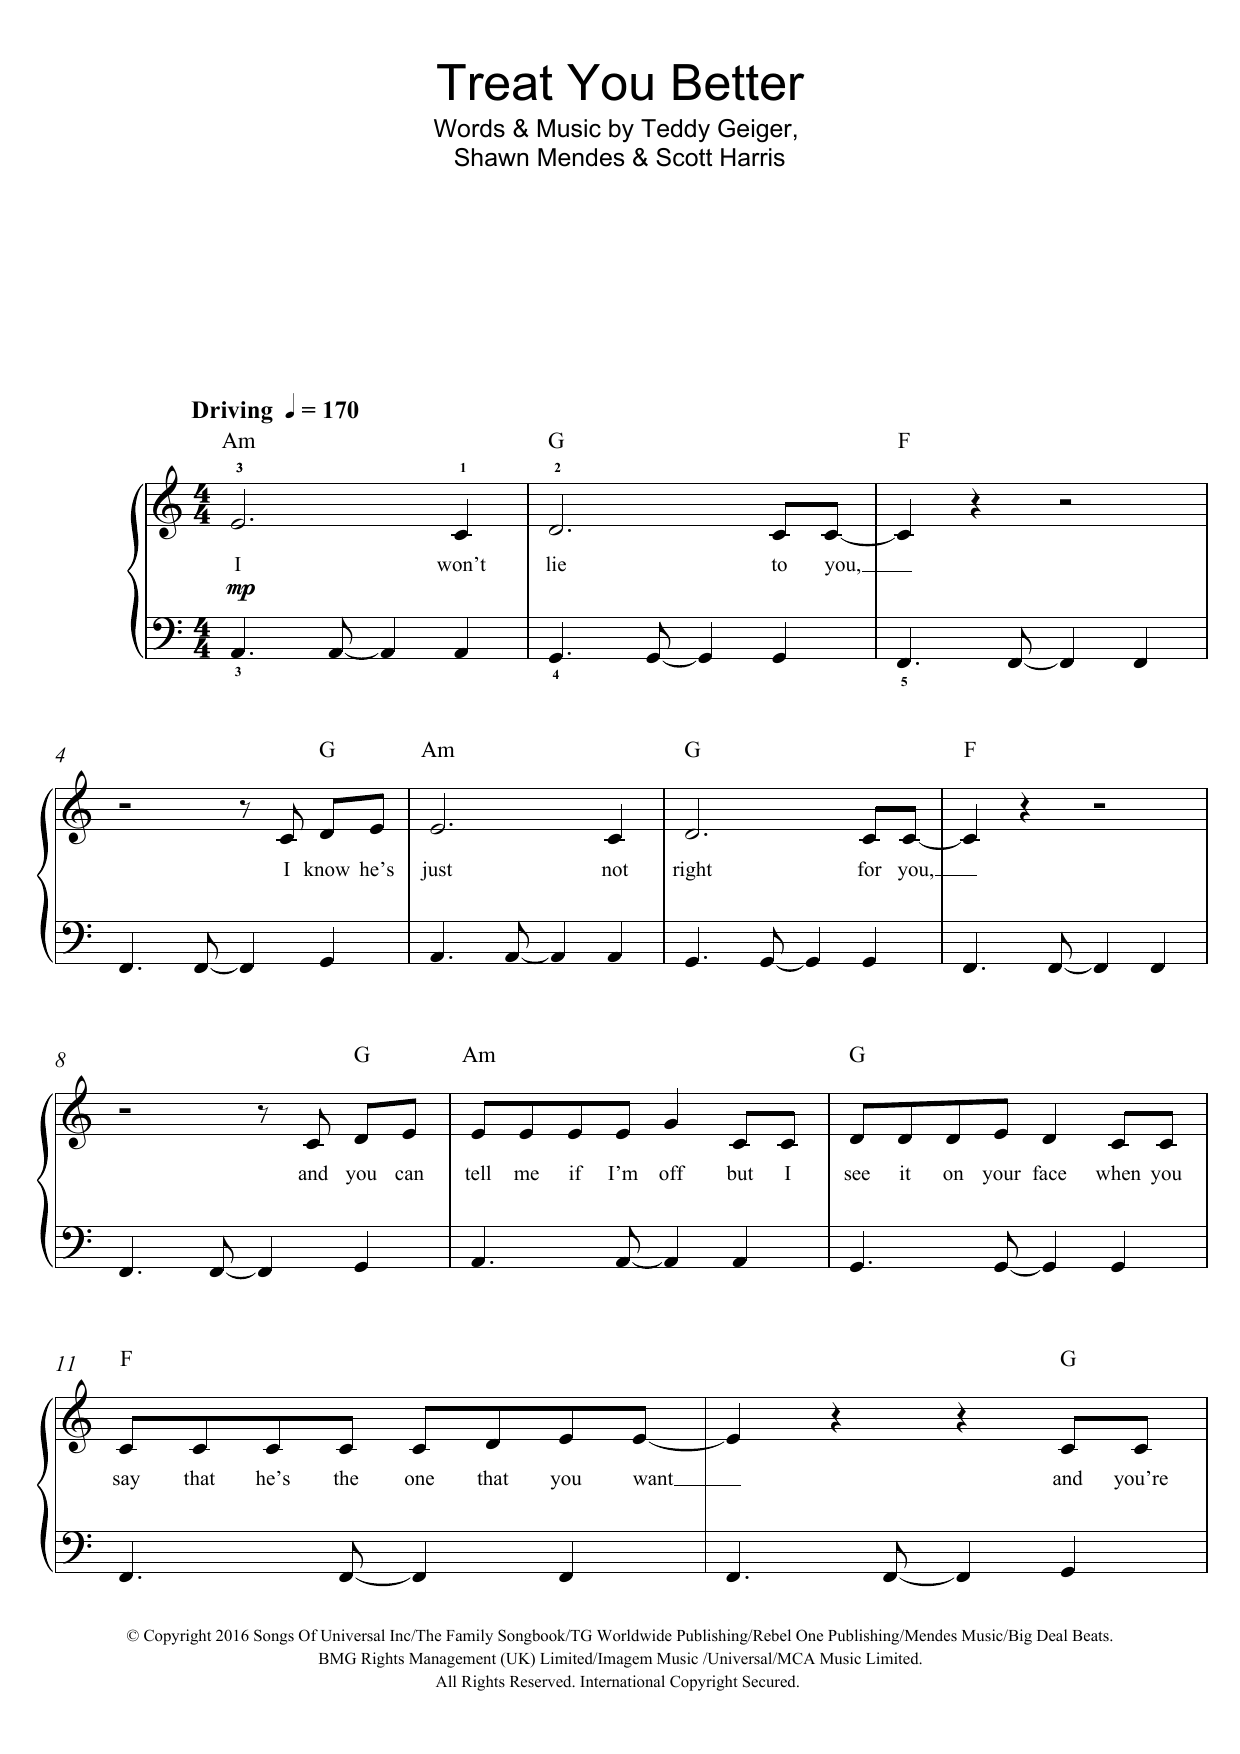 Download Shawn Mendes Treat You Better Sheet Music